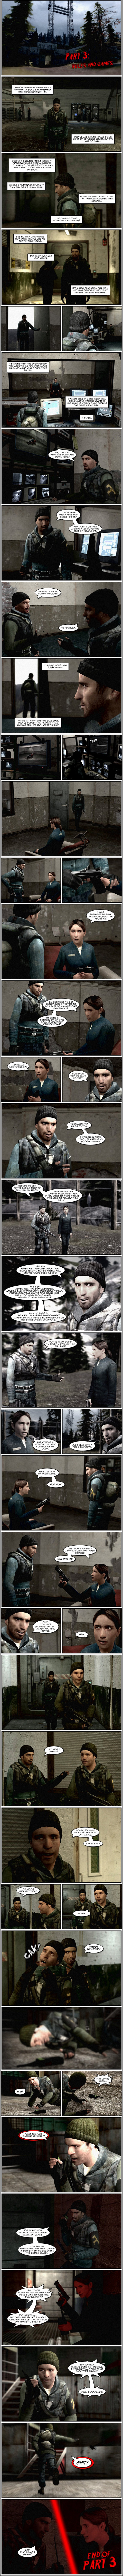 At the Resistance's White Forest base, Laslow Morgan wonders about recent rumors of Gordon Freeman appearing in City Seventeen. He thinks of how people are hailing him as some sort of returning hero, but Laslow is not so sure, as Freeman killed over a hundred US Marines, countless Xen aliens and an alien emperor during the Black Mesa Incident. Laslow notes that Freeman has a higher body count than any other human alive and someone who could do that without flinching isn't normal and would have to be someone a bit like Laslow. As he walks across the base, Laslow ponders how many people like himself may exist in the world, as he has only ever met one other, and it's a new sensation for him knowing someone who truly understands his feelings. Laslow reaches a security room where another rebel is keeping guard on the Combine assassin ZK Seven, who is sitting in a dentist chair motionless. Laslow thinks of the irony of the only person who accepts him for who he is being an ex-Combine who he once tried to kill. He's not sure if he can trust her and going along with her game is like playing with fire, but he reasons there's one thing about fire: it's fun. The guard watching ZK notices Laslow and asks what he is doing there. Laslow points out the guard has been stuck there for hours and suggests he take a break while Laslow covers the rest of his shift. The guard happily takes his suggestion, thanking Laslow, who replies no problem. As the guard leaves, Laslow thinks of how ridiculously easy that is, and that, facing a threat like the Combine, people forget that humanity has always been its own worst enemy. Laslow deactivates the security cameras watching ZK and enters the cell. He grabs her arm and puts a pistol in her hand, reawakening her. She smiles and tells him she was beginning to think he had forgotten about her, then adds that she's beginning to get really sick of having to be a part of Magnusson's experiments. She complains that not being in control of her own body is incredibly frustrating and tells Laslow she'd really like to kill Magnusson, who replies she knows they can't do that and that he explained the rules to her, which would put them both in danger if she broke them. In a flashback, as a strange figure watches them, Laslow explains to ZK his rules, telling her he survived this long by following them and if she wants to work with him, she needs to follow them as well. Laslow lists his rules: one, never kill anyone important, because people tend to notice when a well-known figure goes missing, two, never kill twice in one week, unless the opportunity presents itself, as people disappear all the time around there, but if too many people vanish, it starts to look suspicious, and three, only kill in a safe environment, where there's no chance of being discovered by anyone. Laslow then asks her to give him that gun back, she protests that she will lose control of her body without a weapon, but he asks that she bear with it for a few days. Back in the present, ZK says fine, she will play by Laslow's rules for now. She aims the gun at him and tells Laslow not to forget she saved him from those zombies and he owes her. Laslow smiles and tells her to keep believing that if if makes her feel better, at which she laughs. Later, Laslow approaches a fellow rebel and asks if he has a minute. He replies that he's just about to head out on patrol and asks if it can wait. Laslow wishes him good luck out there. The man thanks him as he turns his back to Laslow, but Laslow puts him on a chokehold and sarcastically replies he's welcome. The rebel regains consciousness later in another place, with a radio lying next to him. Someone over the radio tells him to pick it up. The rebel angrily asks what the fuck is going on. On the other end, Laslow replies that he picked him to take part in a little game he's playing, then explains that he and his friend decided to have a competition to see who's the better killer, so he's going to run around and they're going to hunt him. As ZK overhears it over the radio with a smile, Laslow adds that he locked all the exits, but maybe he missed one, so he shouldn't let that put him off trying to escape. Laslow tells the rebel to try to stay alive as long as possible as he doesn't want it to be over too quickly and wishes him good luck. The man starts to run as he screams shit. Laslow declares let the games begin. End of part 3.